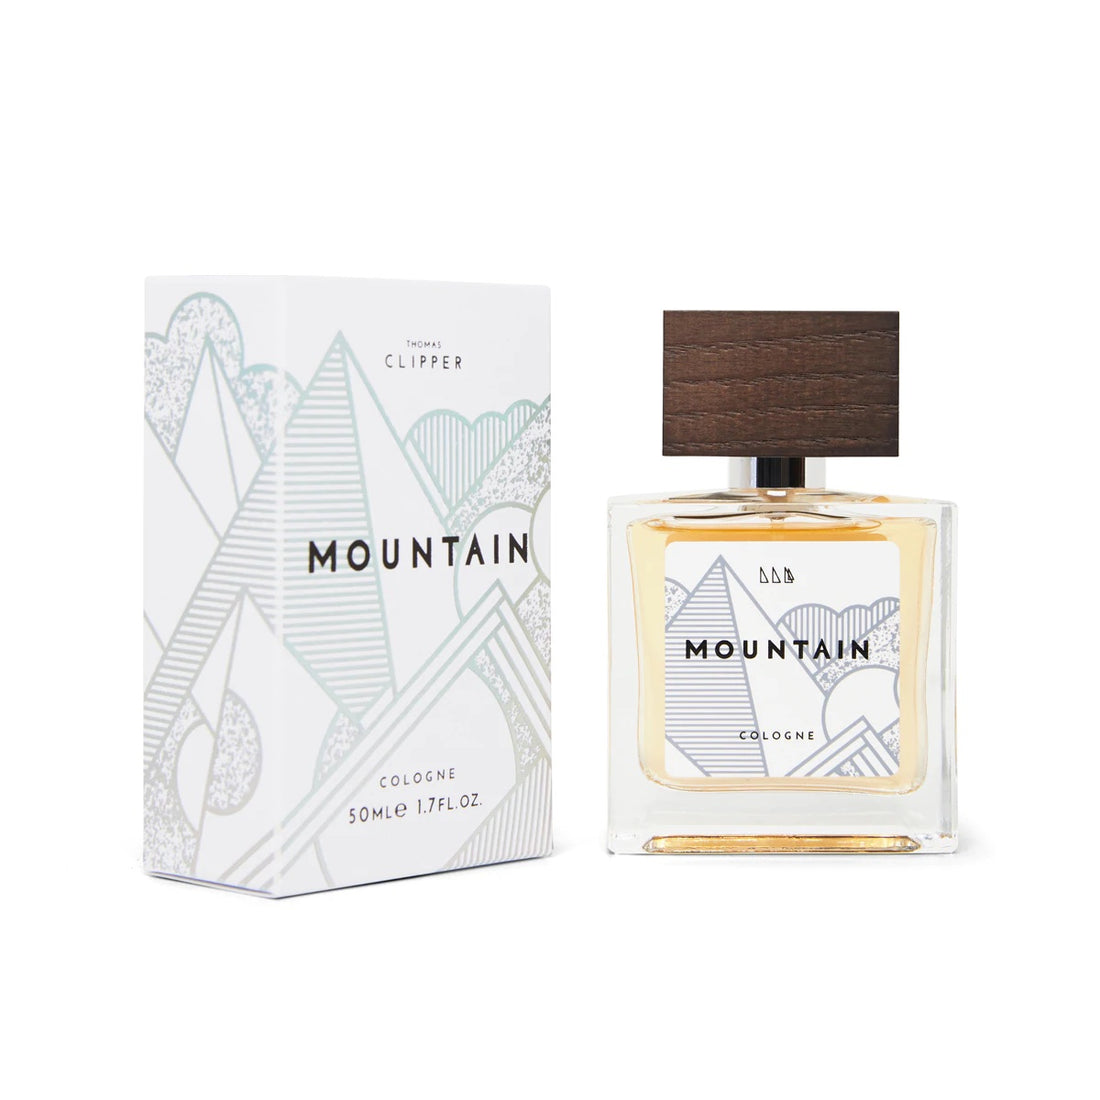 Evening Standard - Mountain is 'top pick' of the men’s a/w fragrances